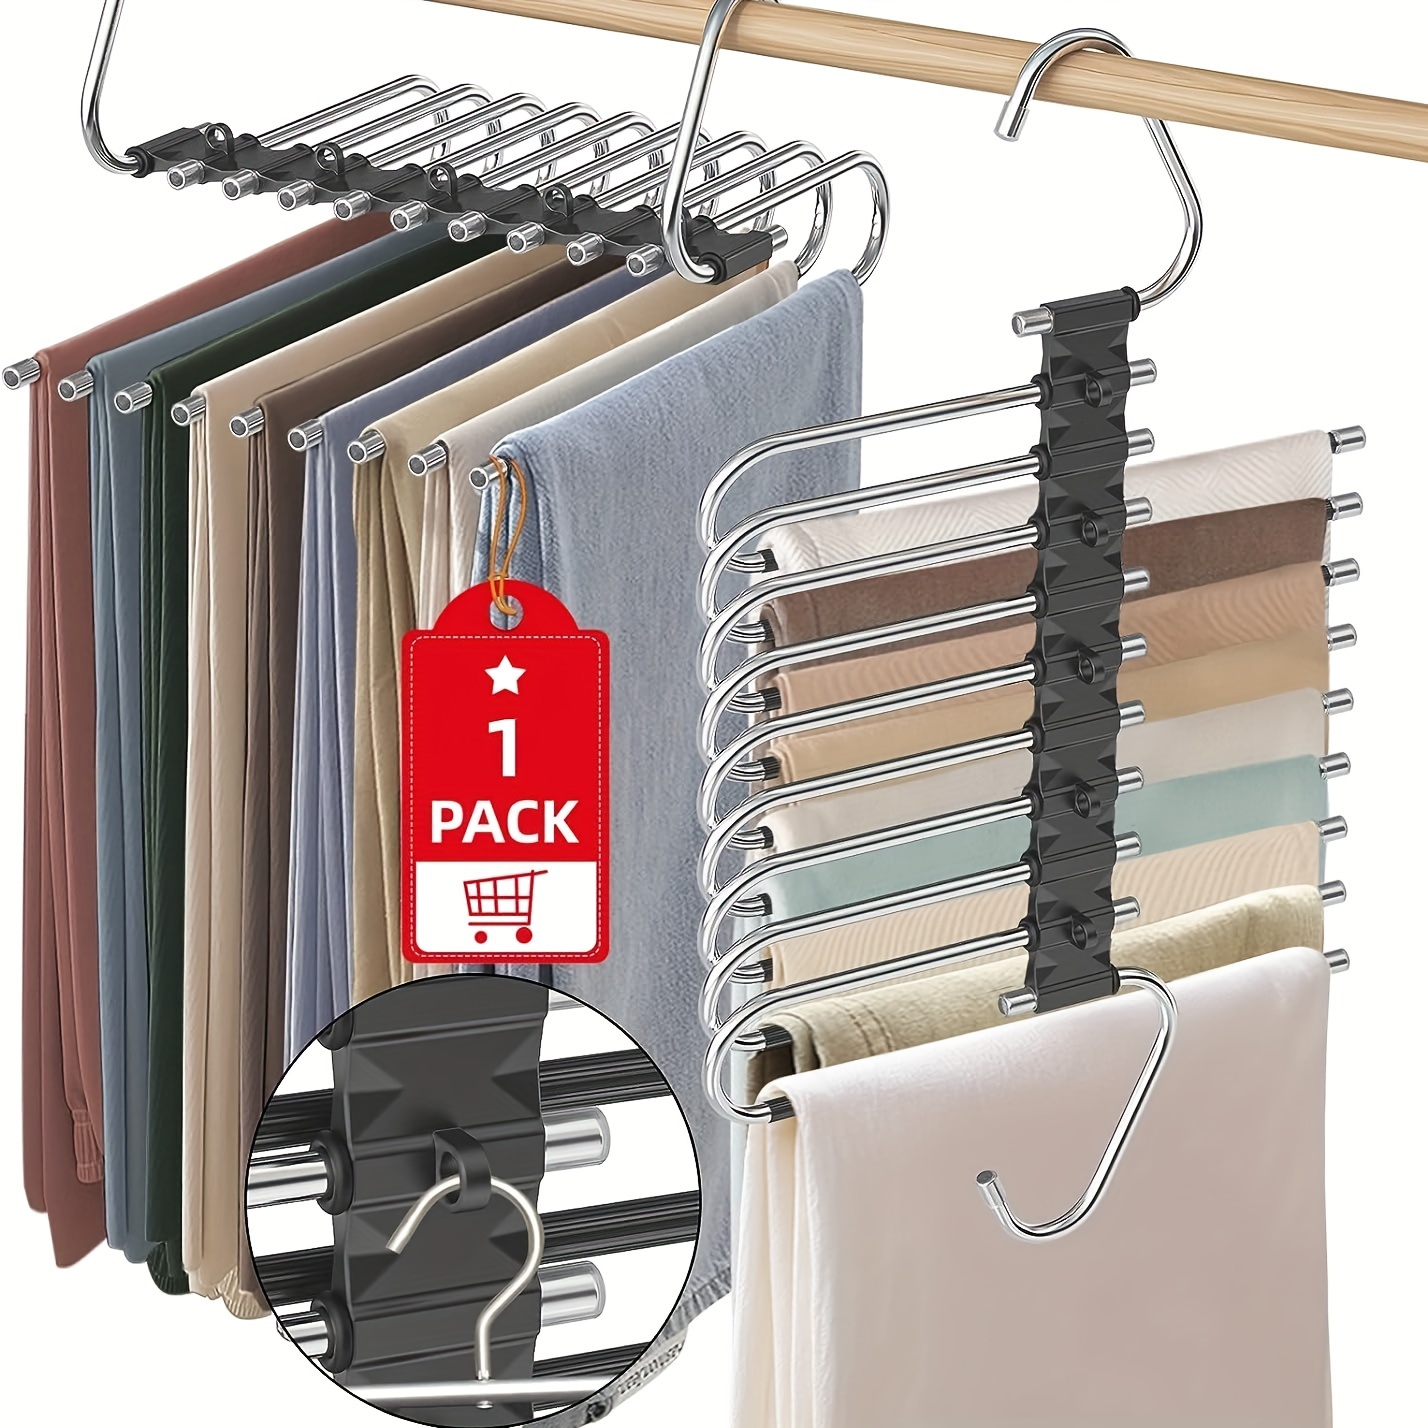 

1pc 9-layer Pants Hanger With 5 Extra Hooks, Non Slip Legging Drying Rack For Clothing Shops, Save Space Storage And Organization For Wardrobe, Closet, Bedroom, Suitable For Pants, Jeans, Scarves